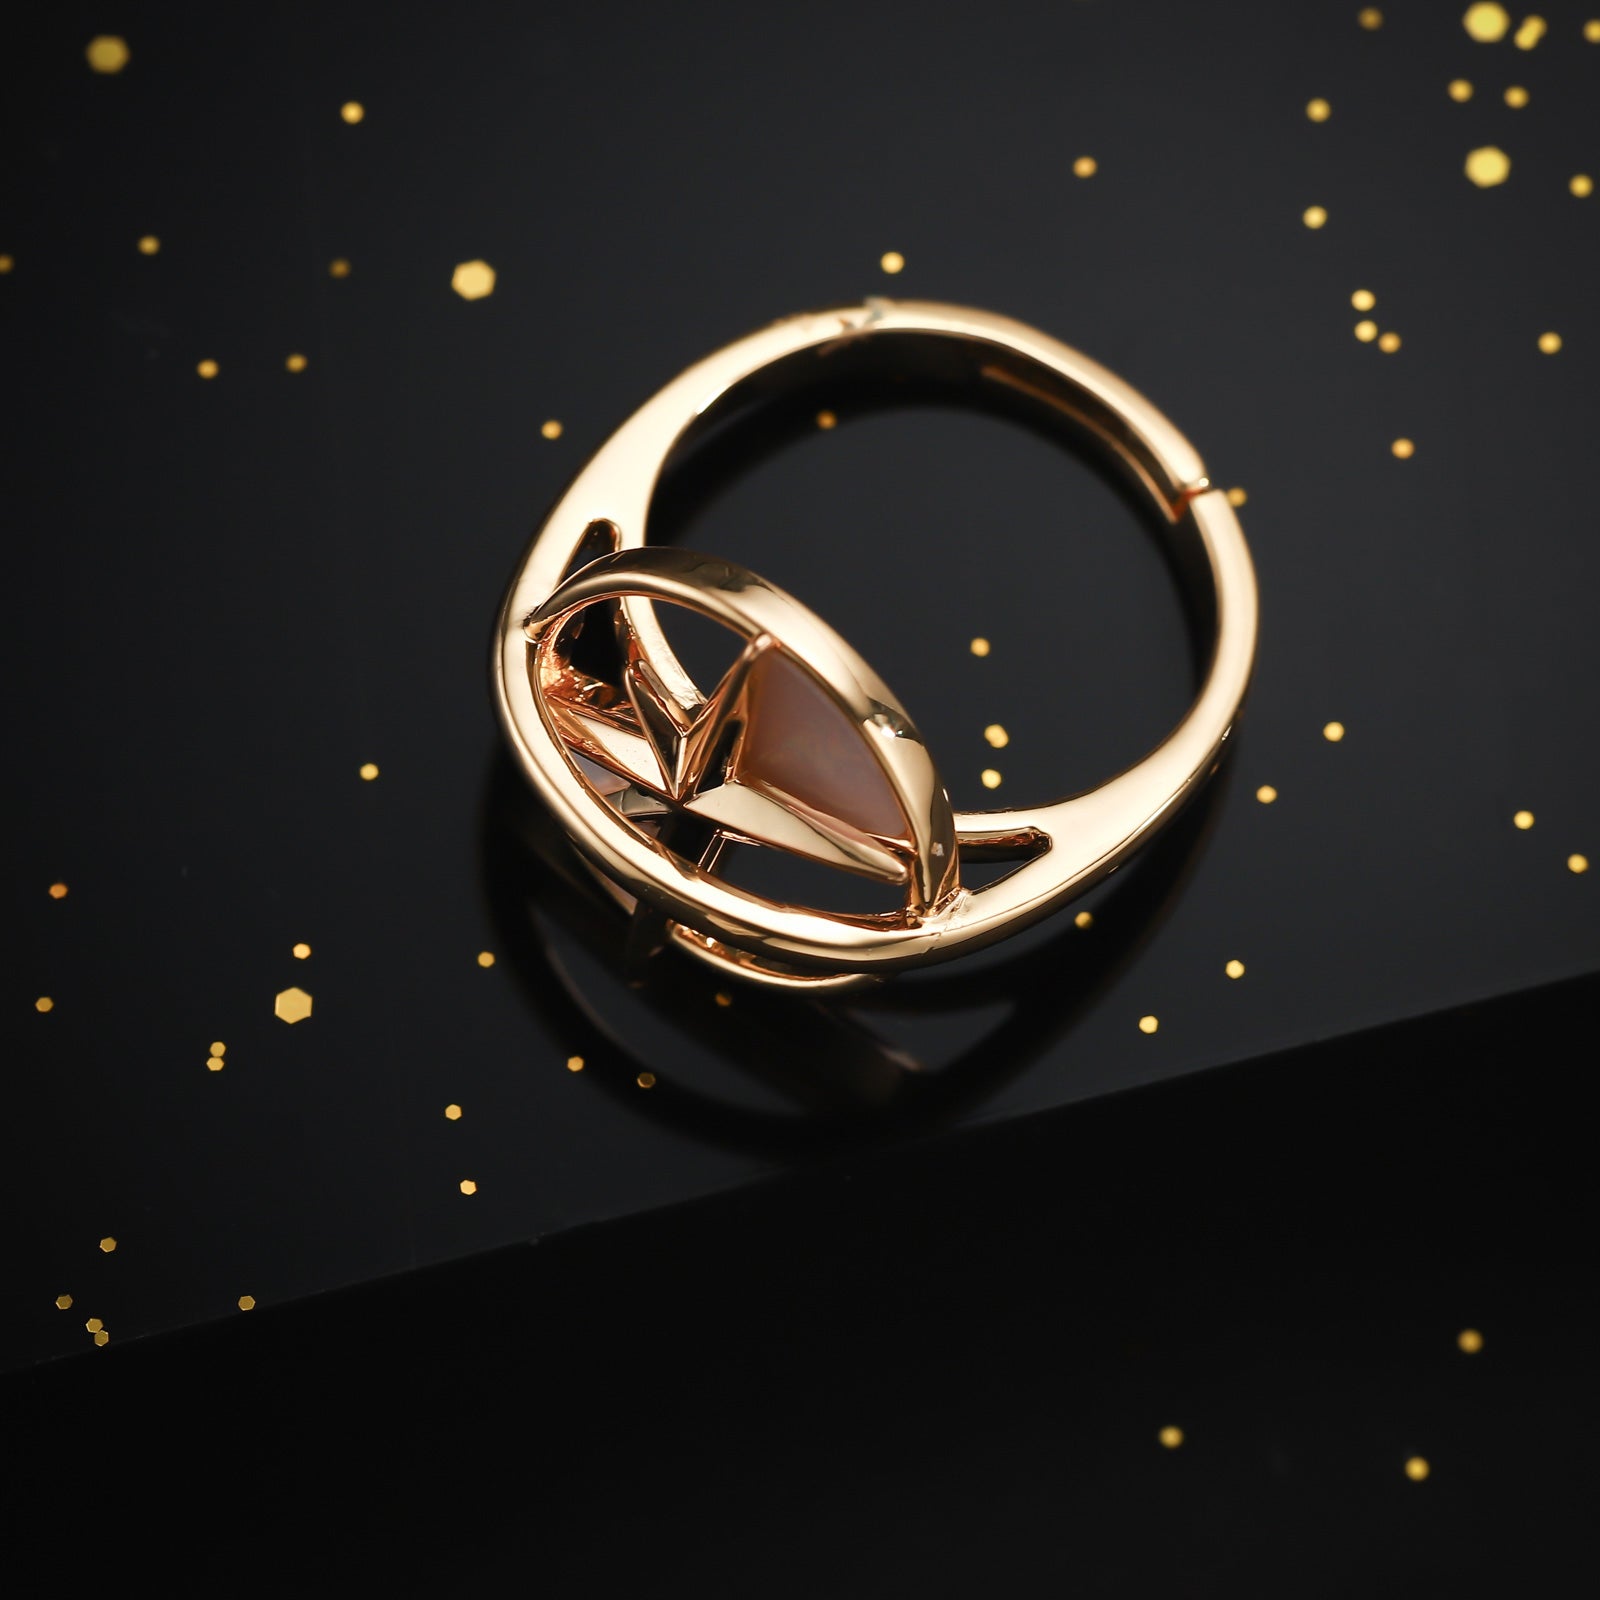 Sphere North Star Sparkly Ring